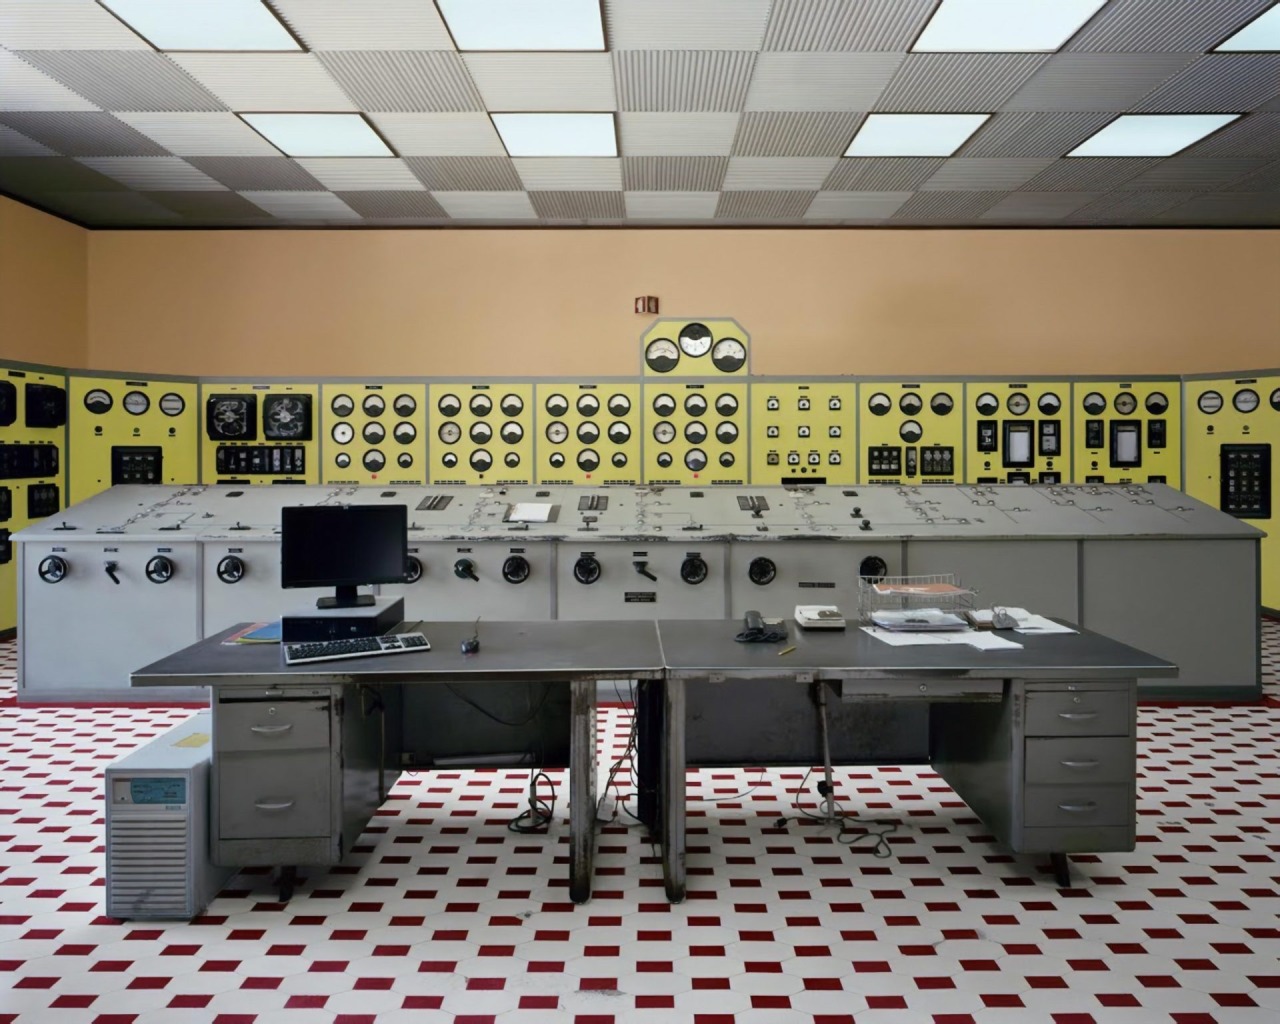 weirdlandtv:Control rooms, power stations, control panels—Soviet era mostly, and